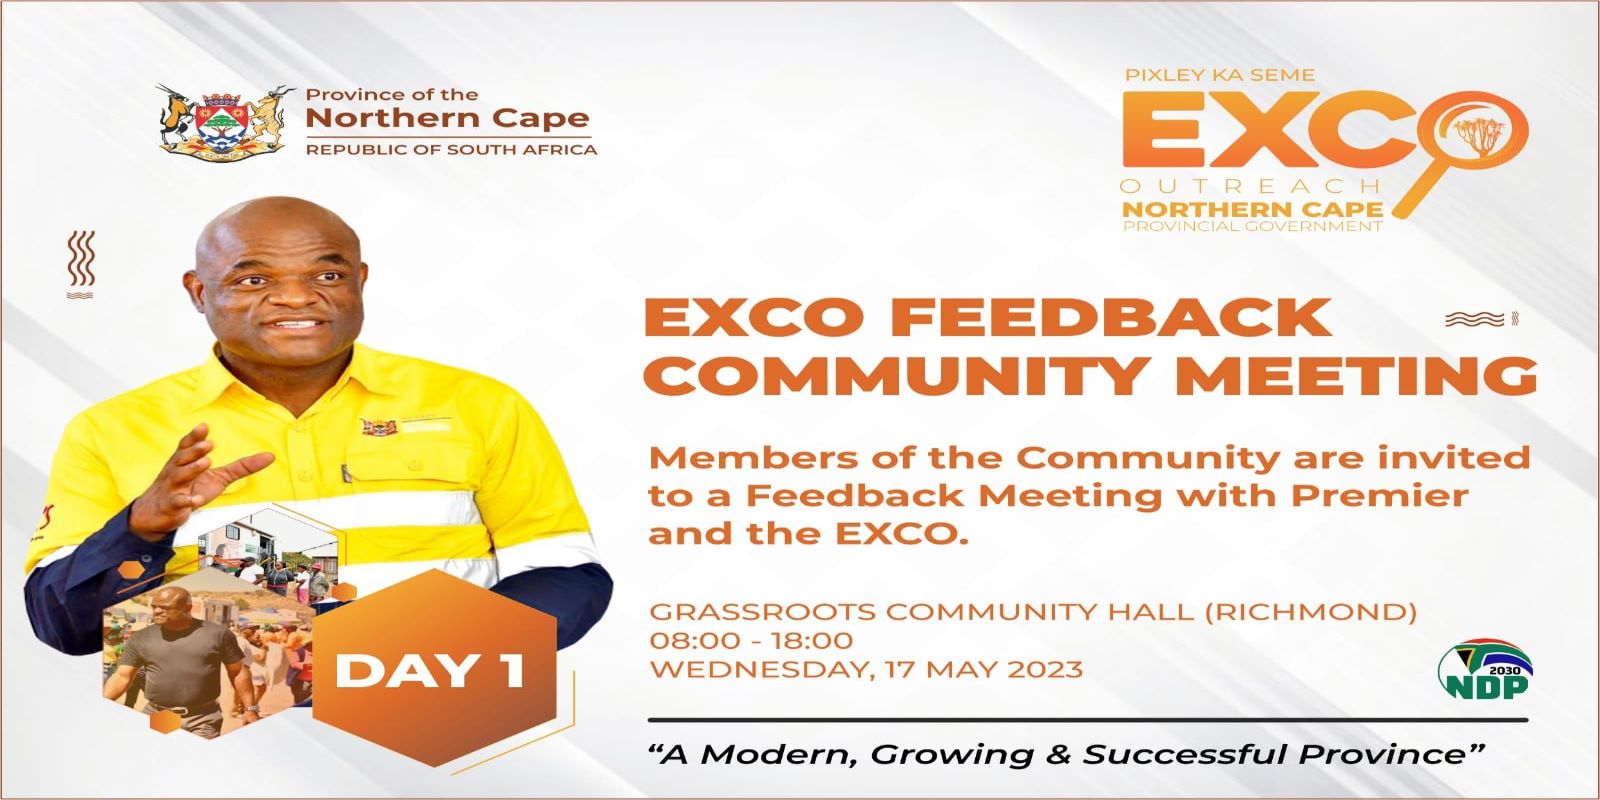 remier Dr. Zamani Saul, will lead the Exco Feedback Community meeting